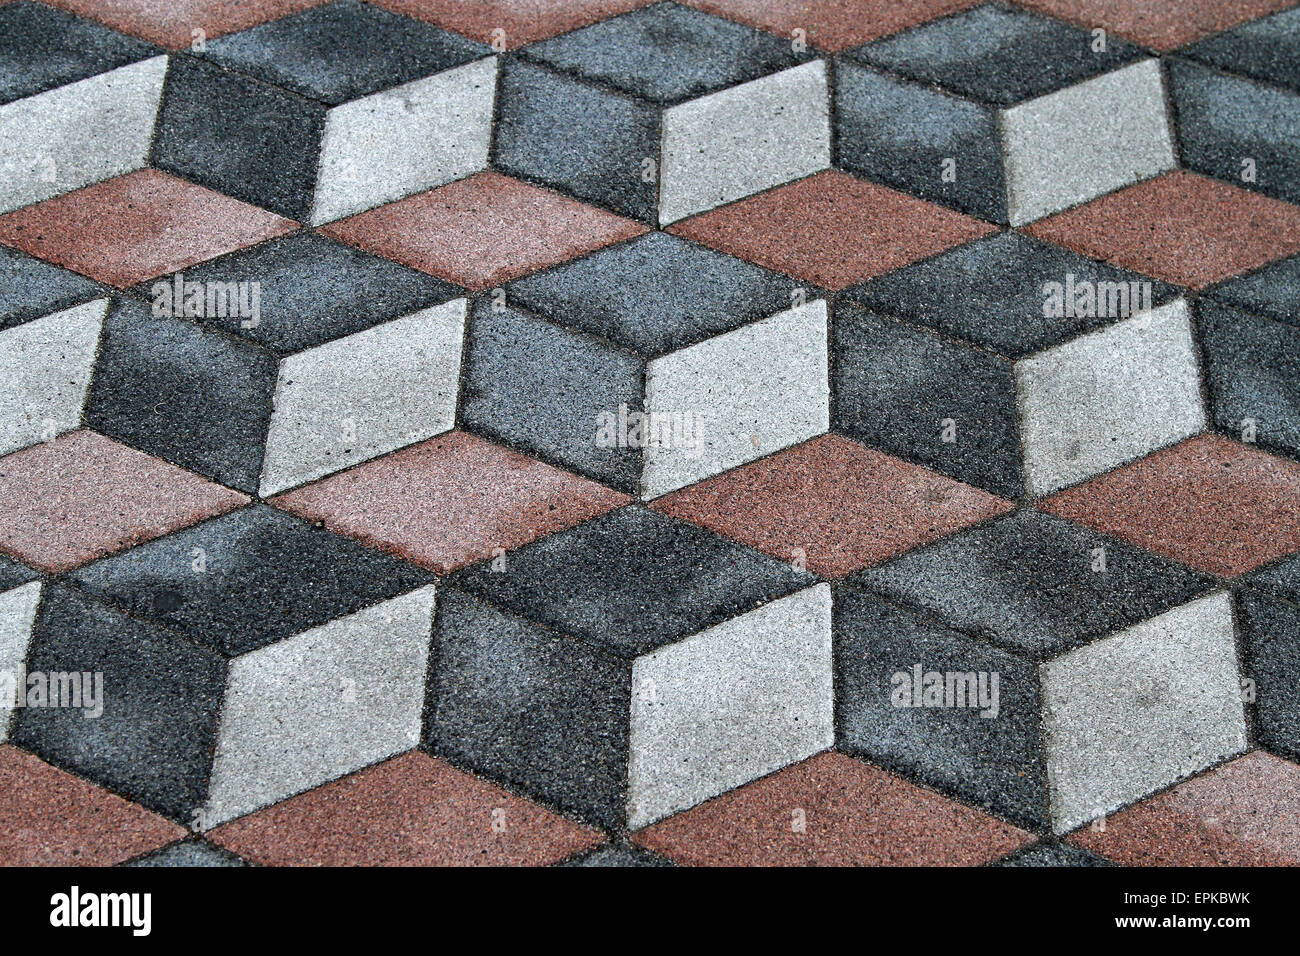 Old tiles with 3d optical illusion Stock Photo